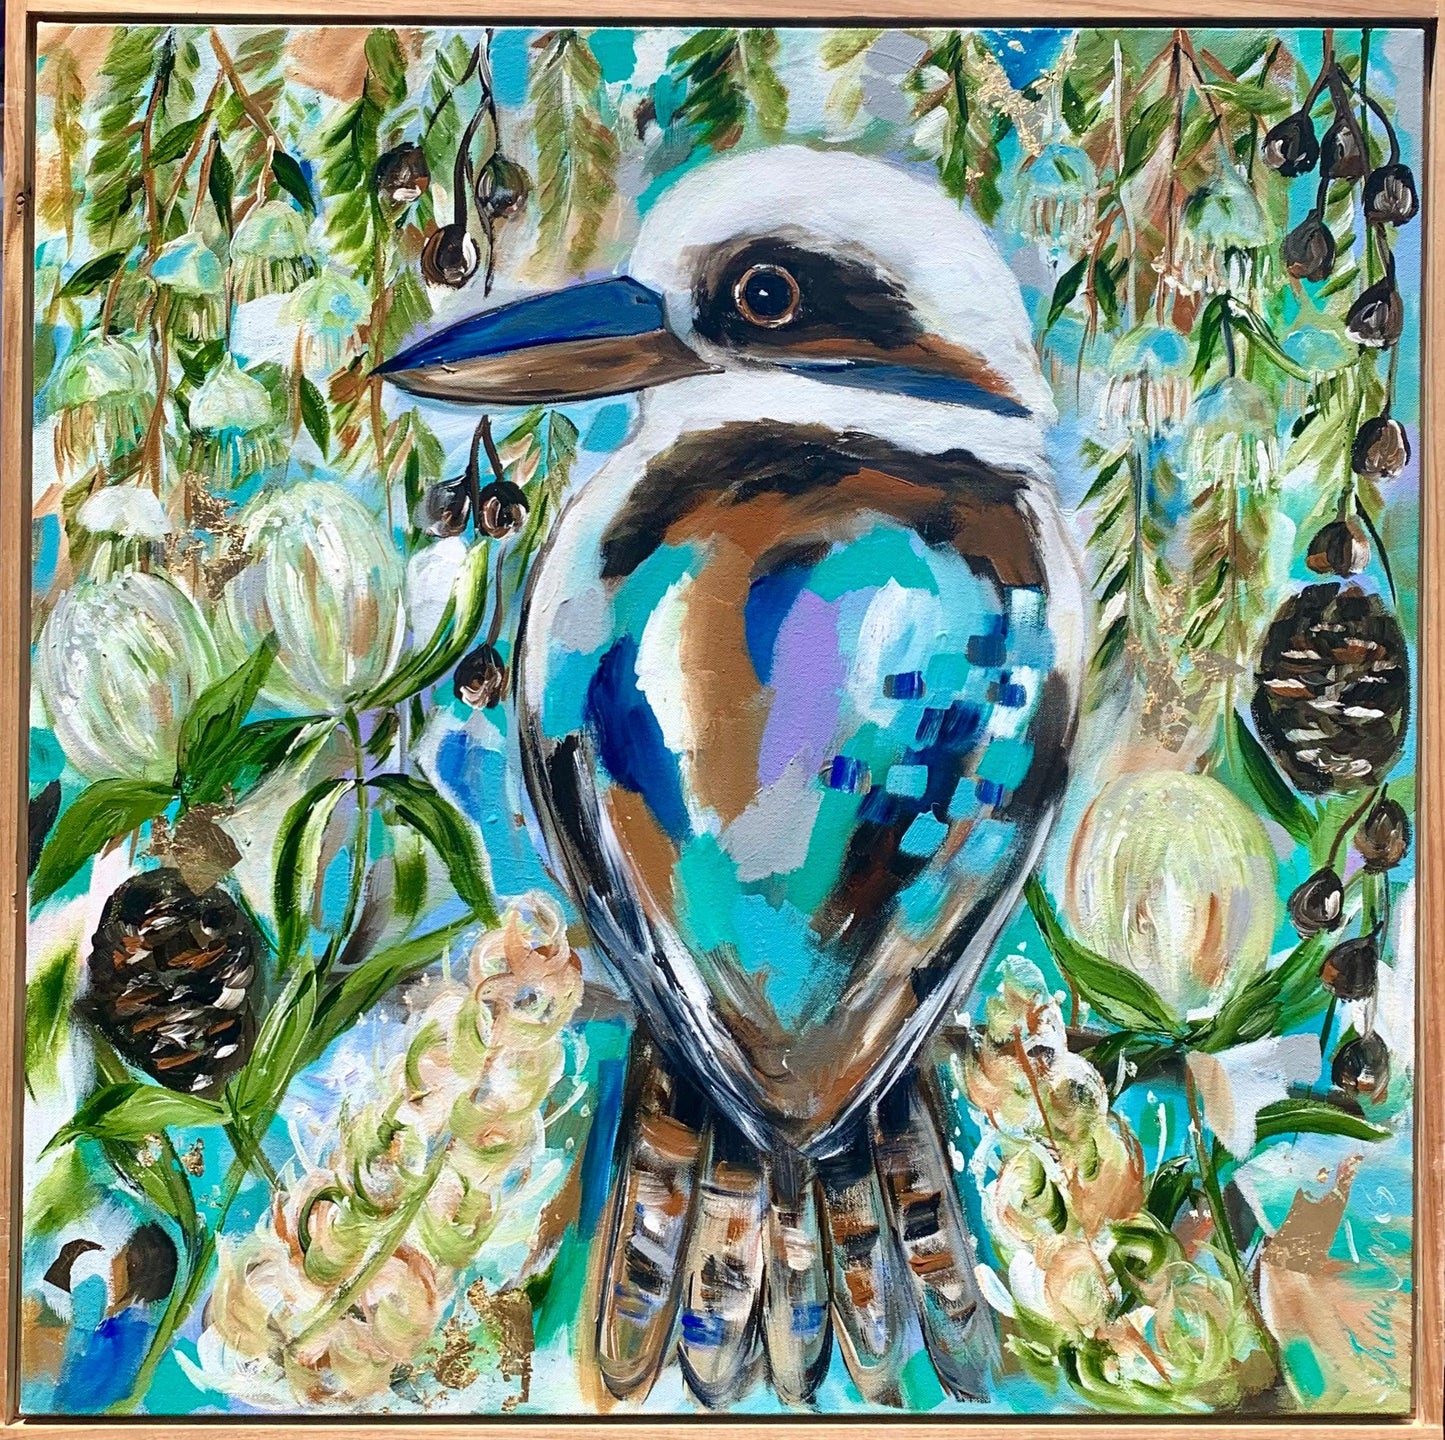 Kookaburra in the bush - 800x800 - Original Artwork - Available by commission